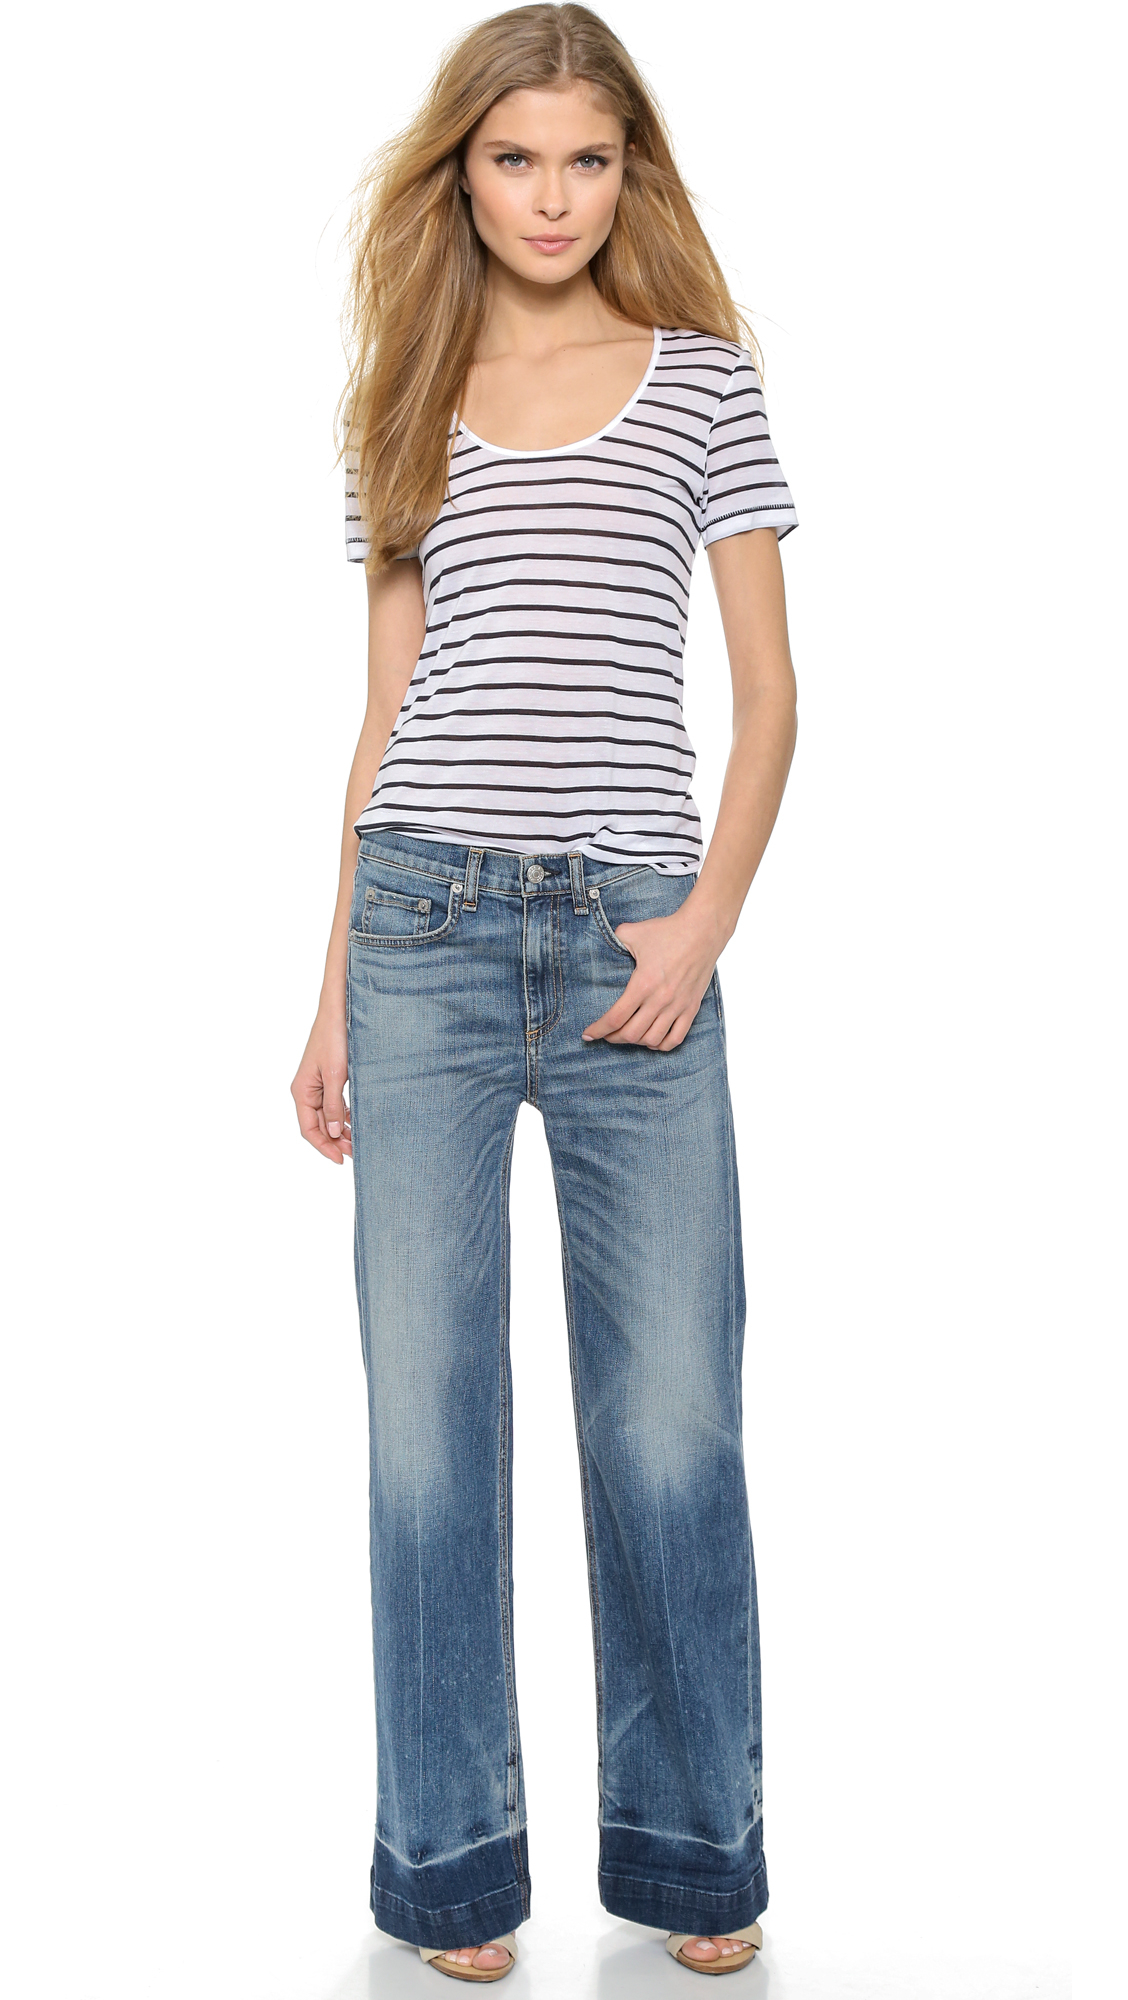 Lyst - Rag & Bone The Loose Fit Wide Leg Jeans - Newquay in Blue